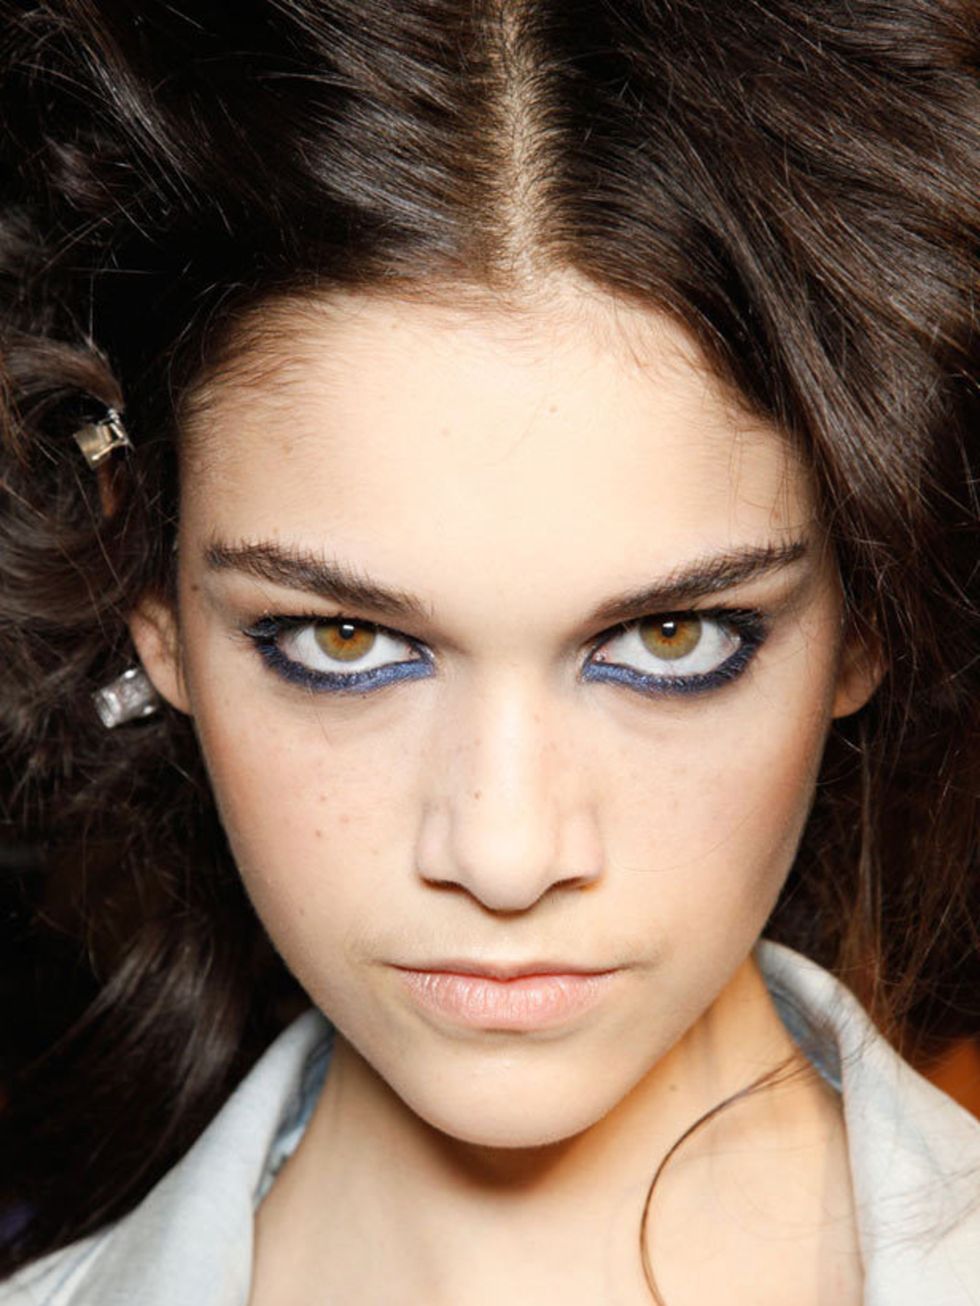 <p>More shows than we can mention here sent models down the catwalks with sooty, sultry, smokey eyes. But each eye has a twist on traditional charcoal. At <a href="http://www.elleuk.com/catwalk/collections/moschino/">Moschino </a>Tom Pecheux smudged a koh